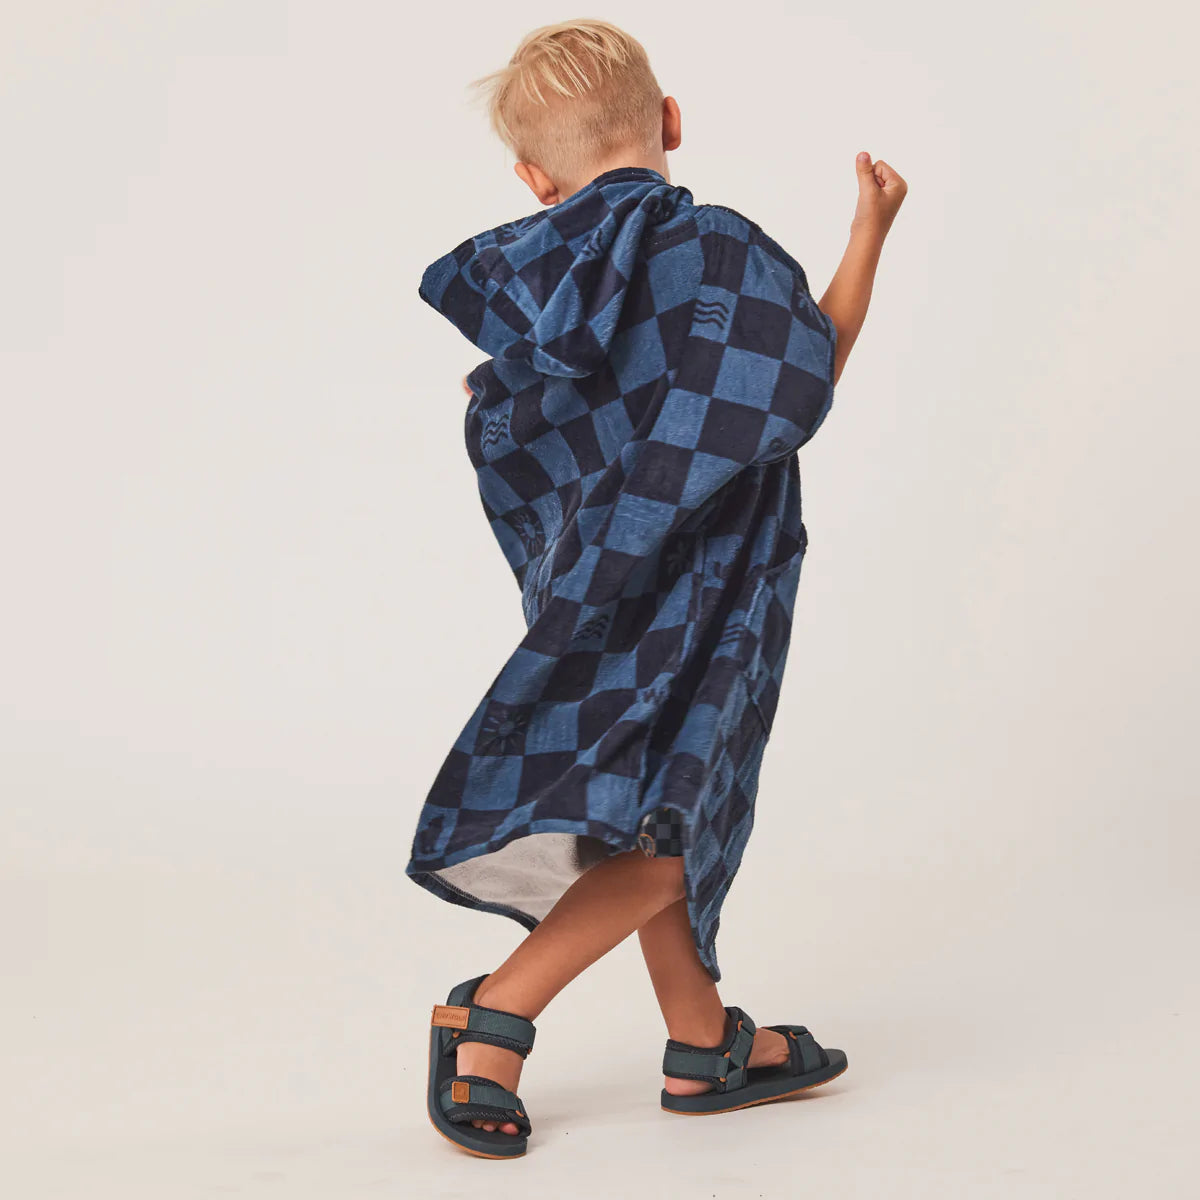 CRYWOLF Hooded Towel Blue Checkered